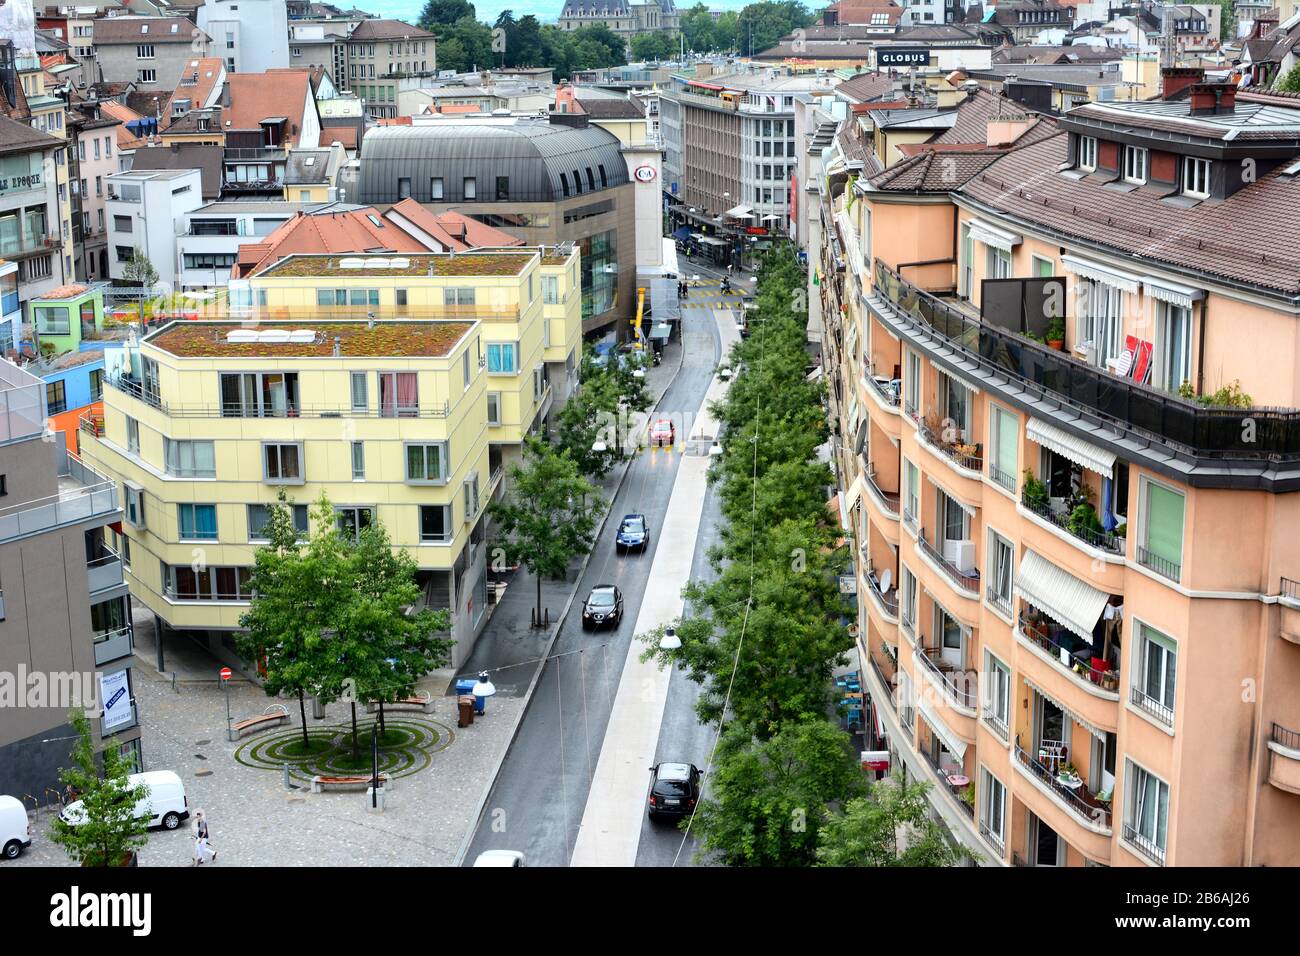 LAUSANNE, SWITZERLAND - JULY 7, 2014: City street, Lausanne, Switzerland. The high angle view shows the roof tops and street of a typical Swiss city. Stock Photo